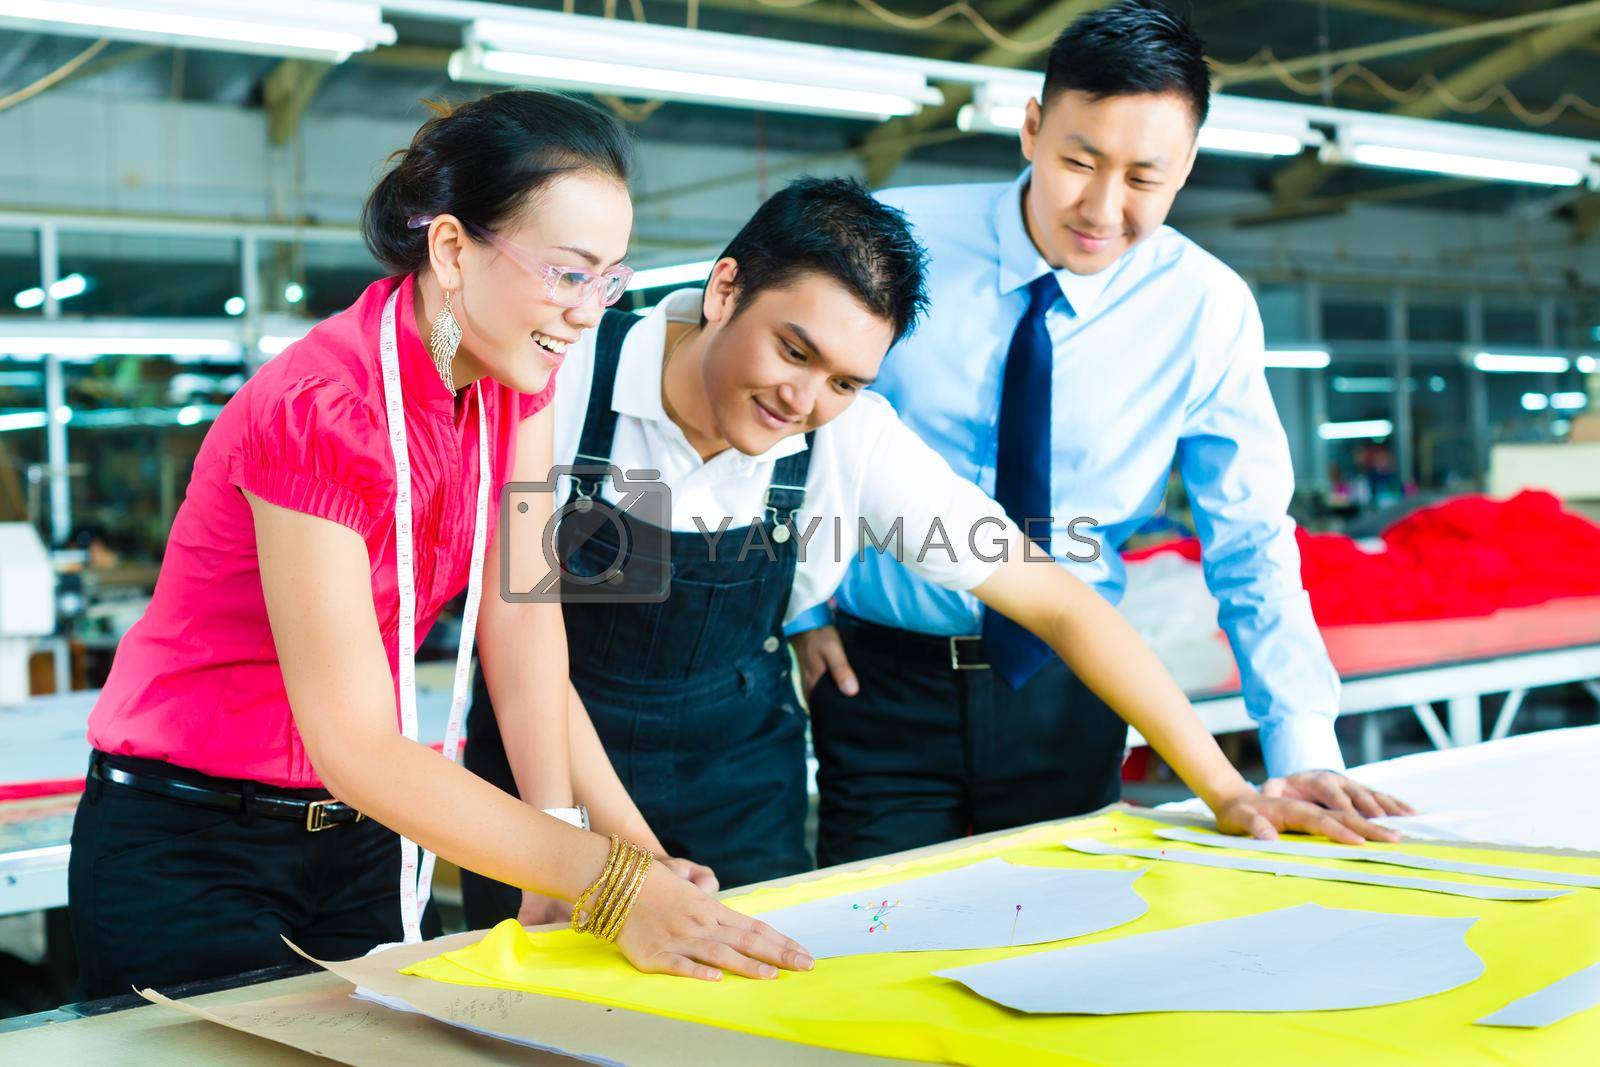 Royalty free image of Worker, Dressmaker and CEO in a factory by Kzenon